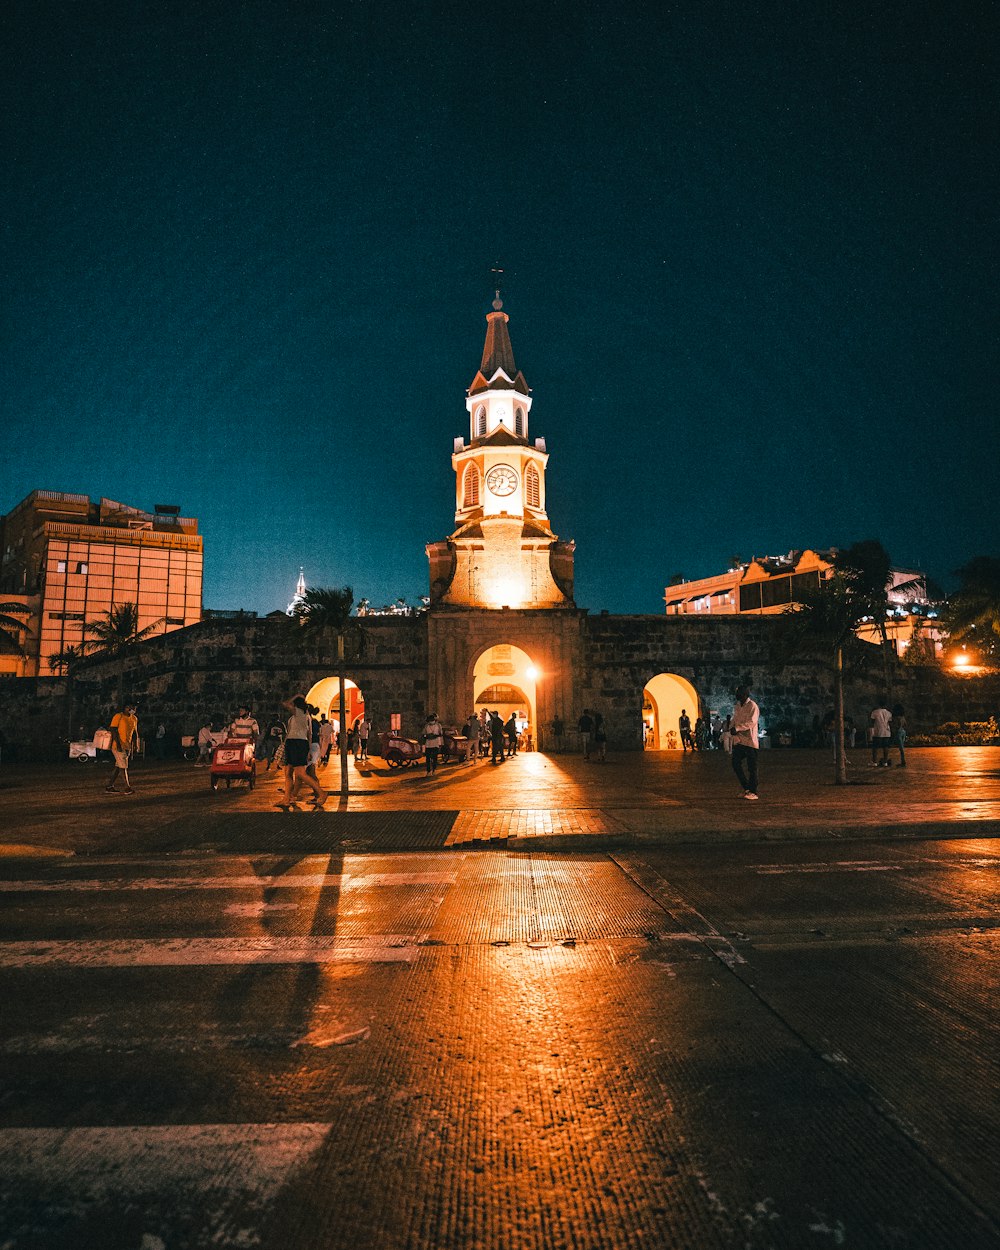 a clock tower lit up at night in a city